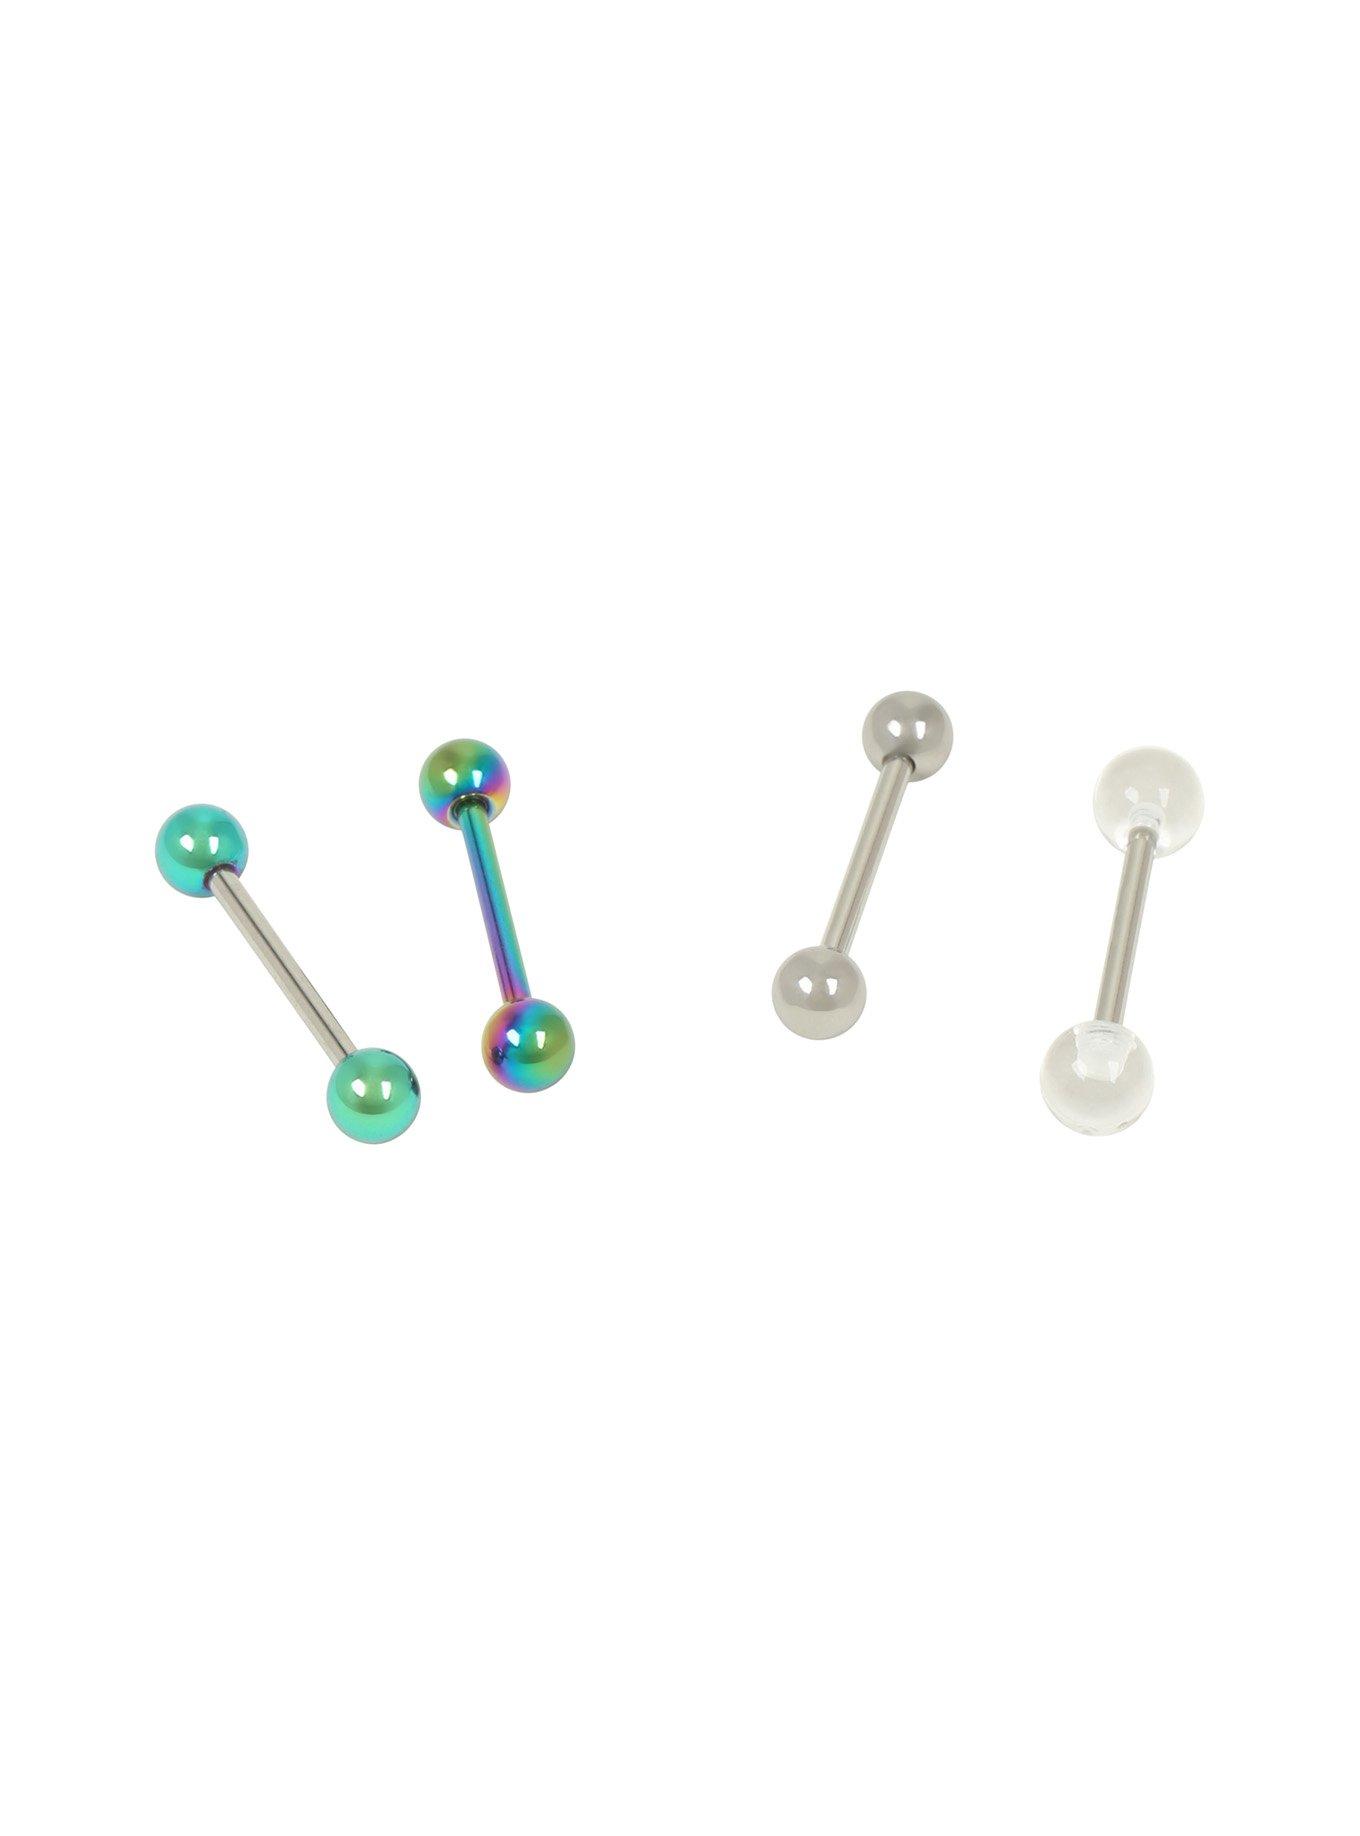 Steel Anodized Green Tongue Barbell 4 Pack, , hi-res